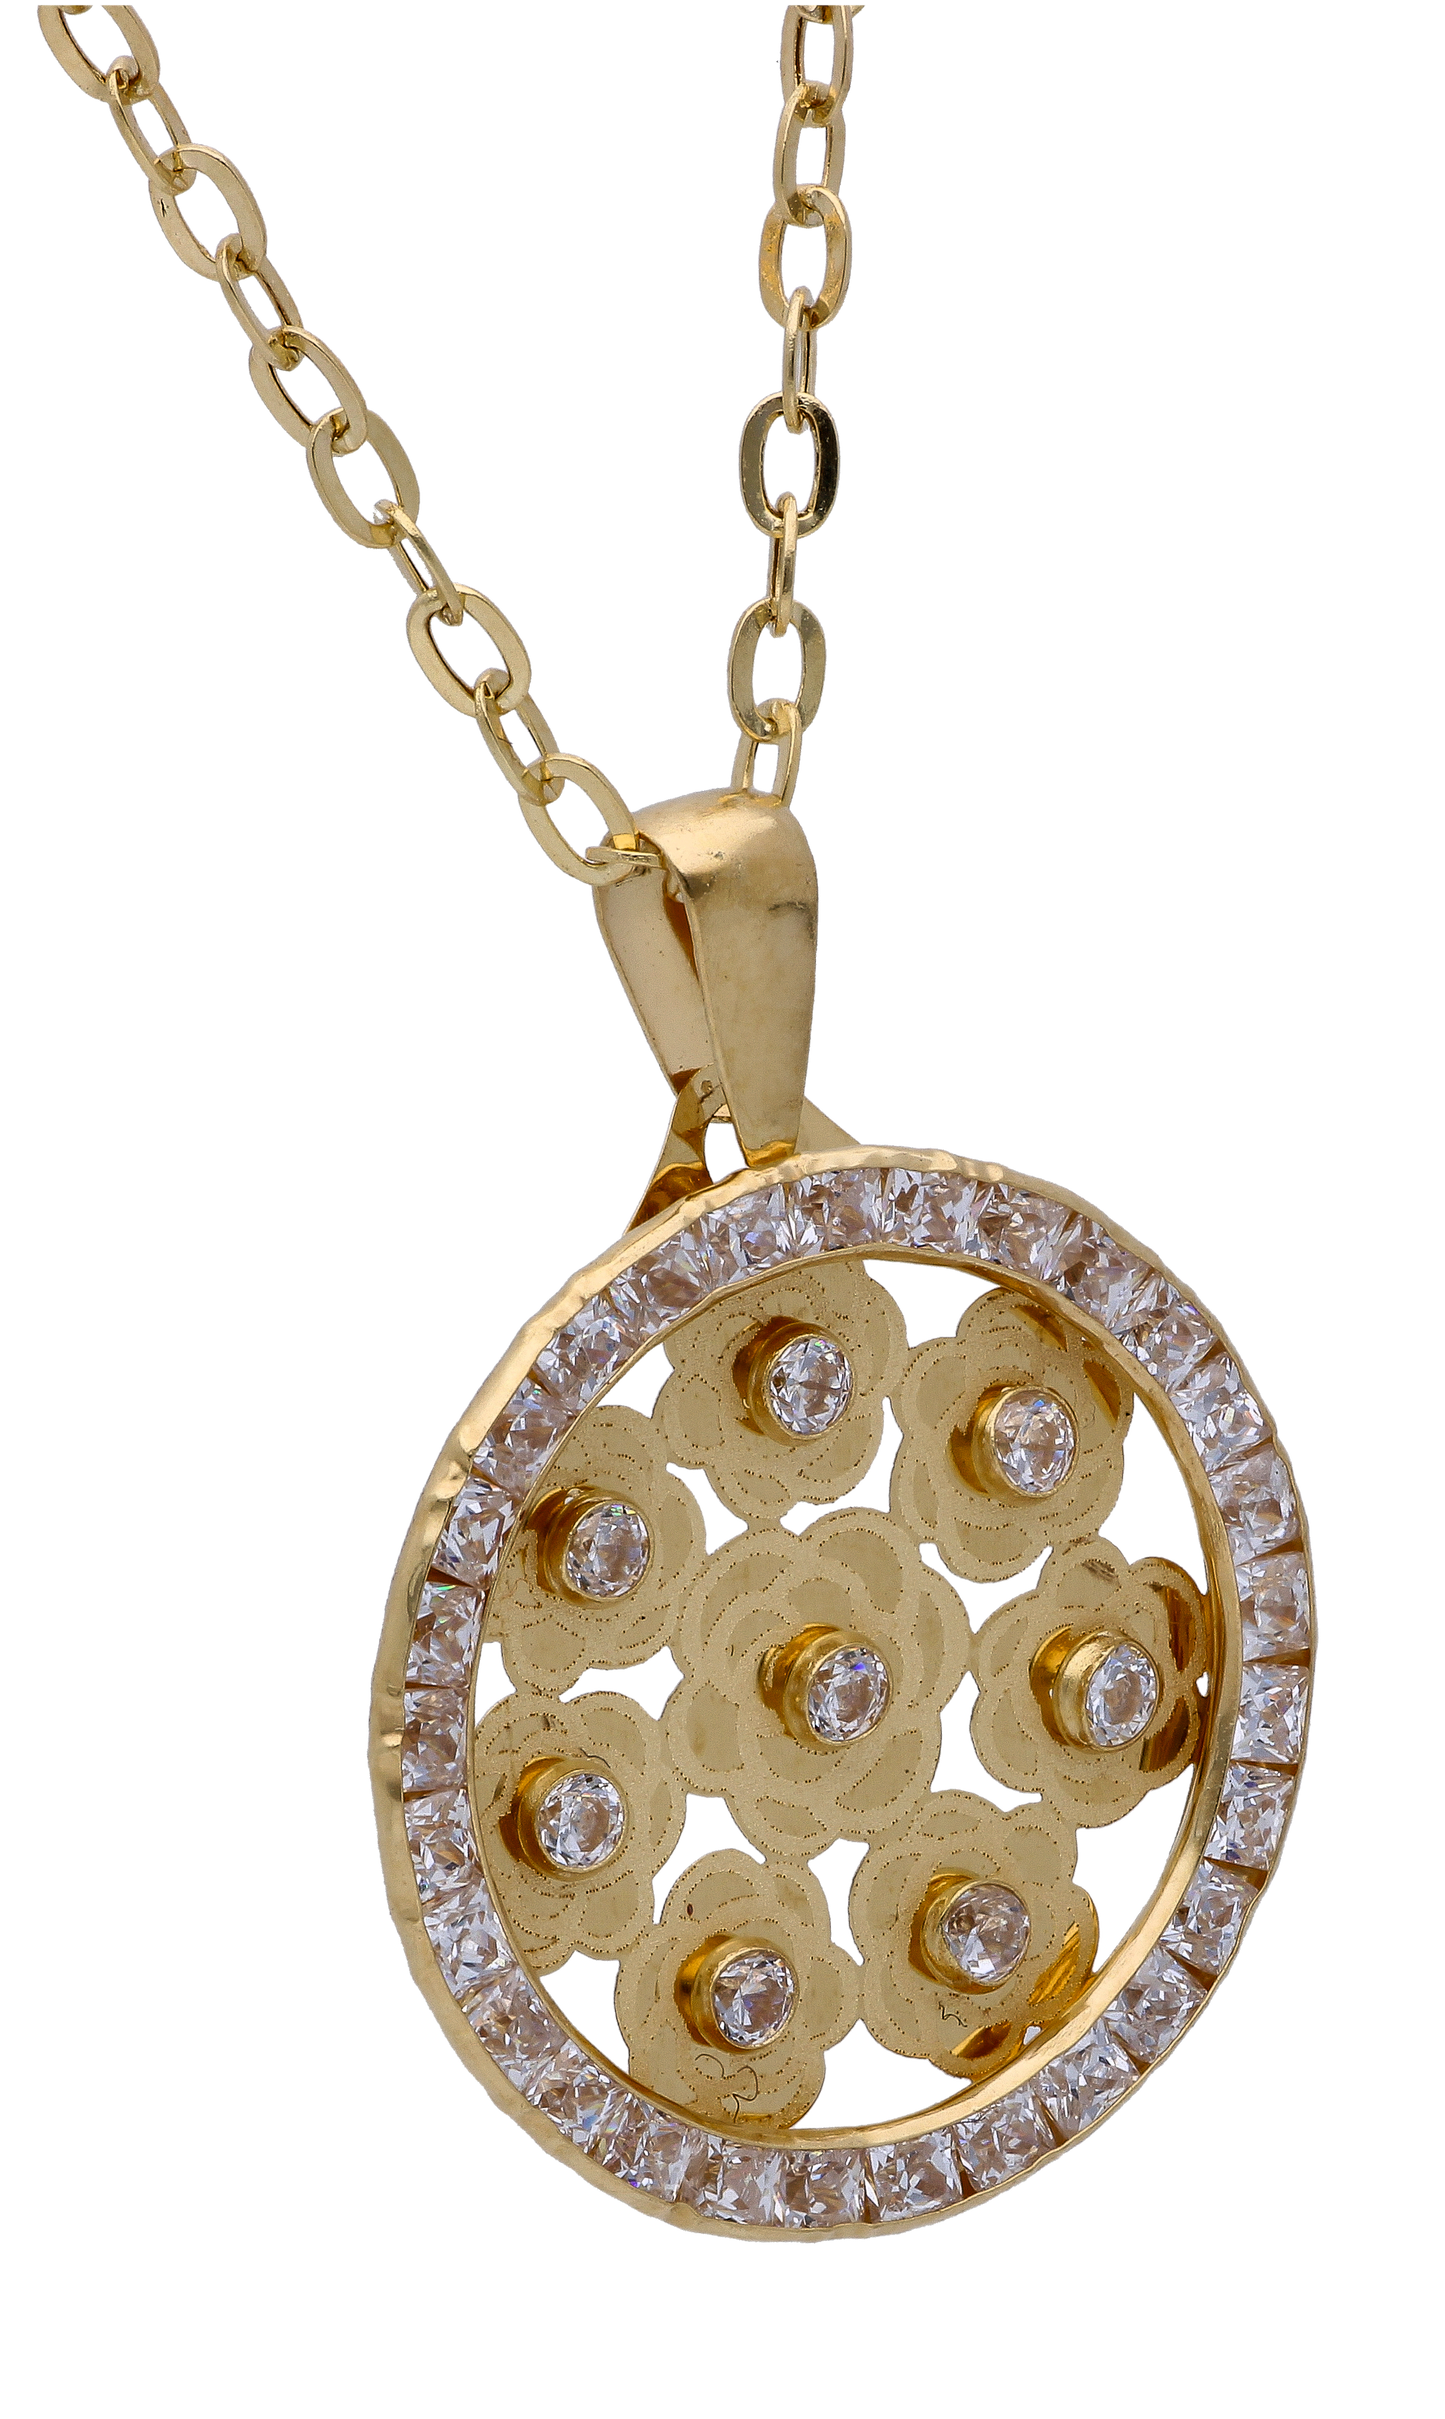 Gold Necklace (Chain with Zircon Gold Pendant) 18KT - FKJNKL18KU6295